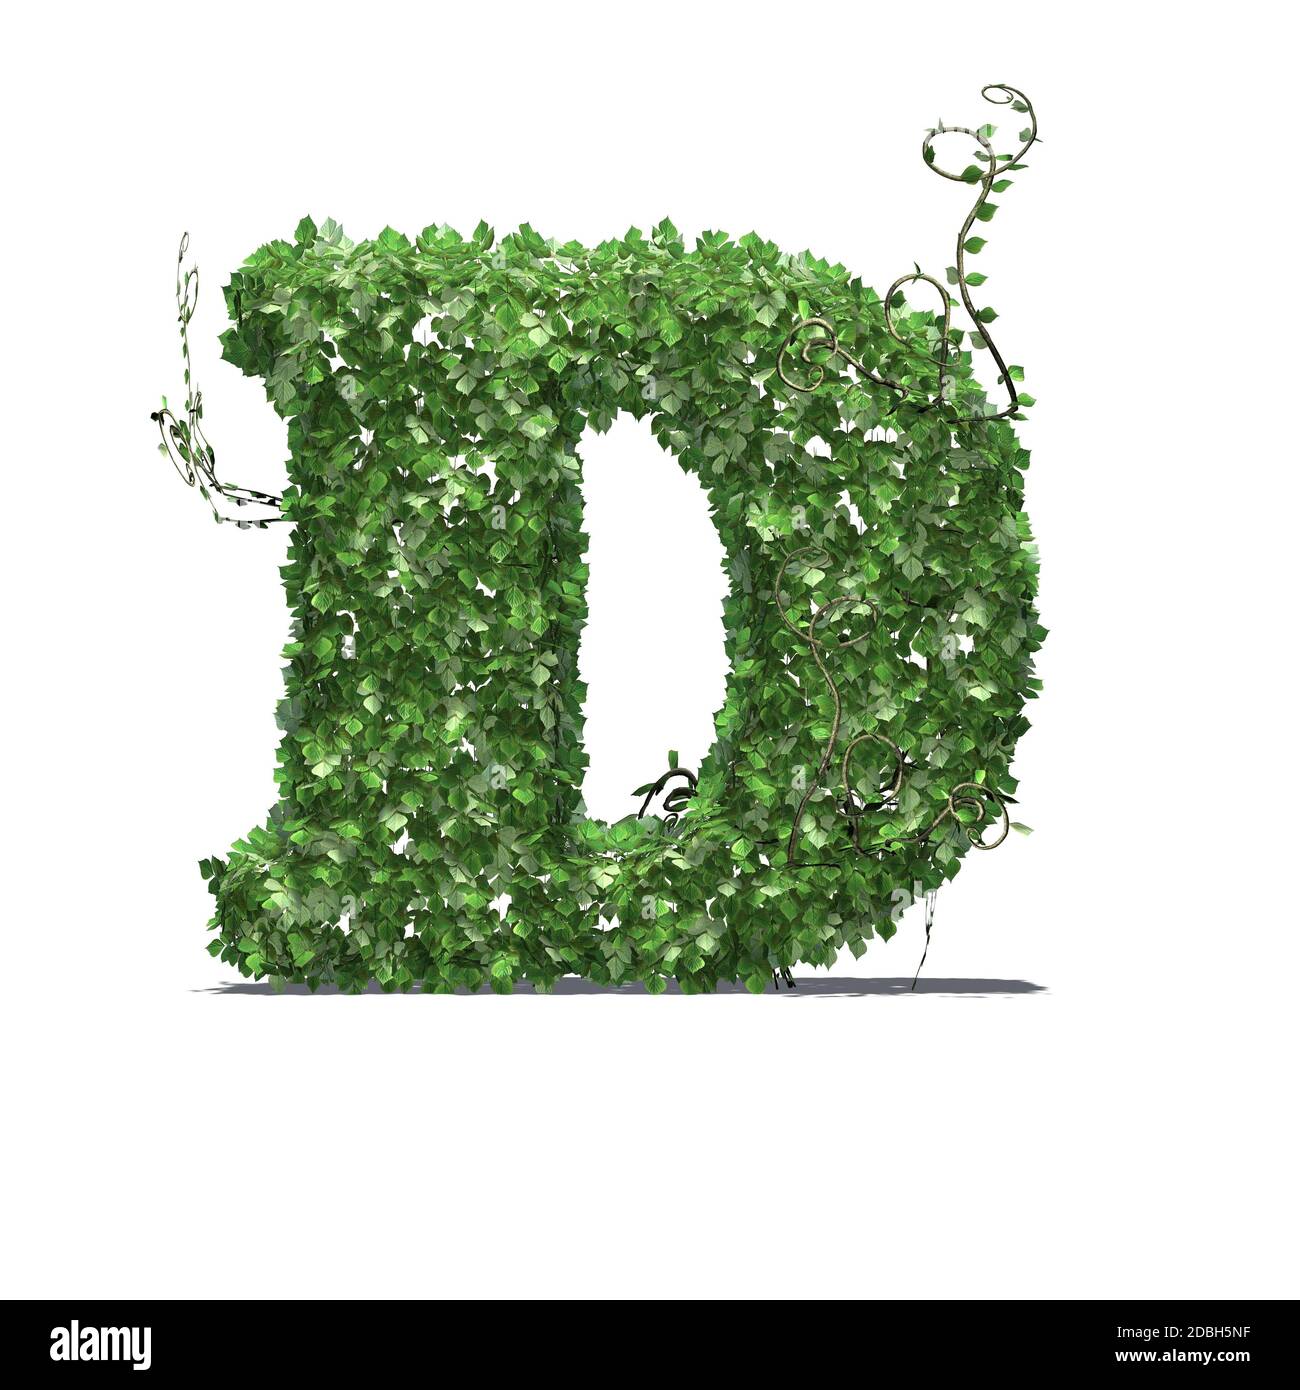 Letter D Typography Logotype Green Blue Letter D Logo Greenblue Gradient  Stock Illustration - Download Image Now - iStock